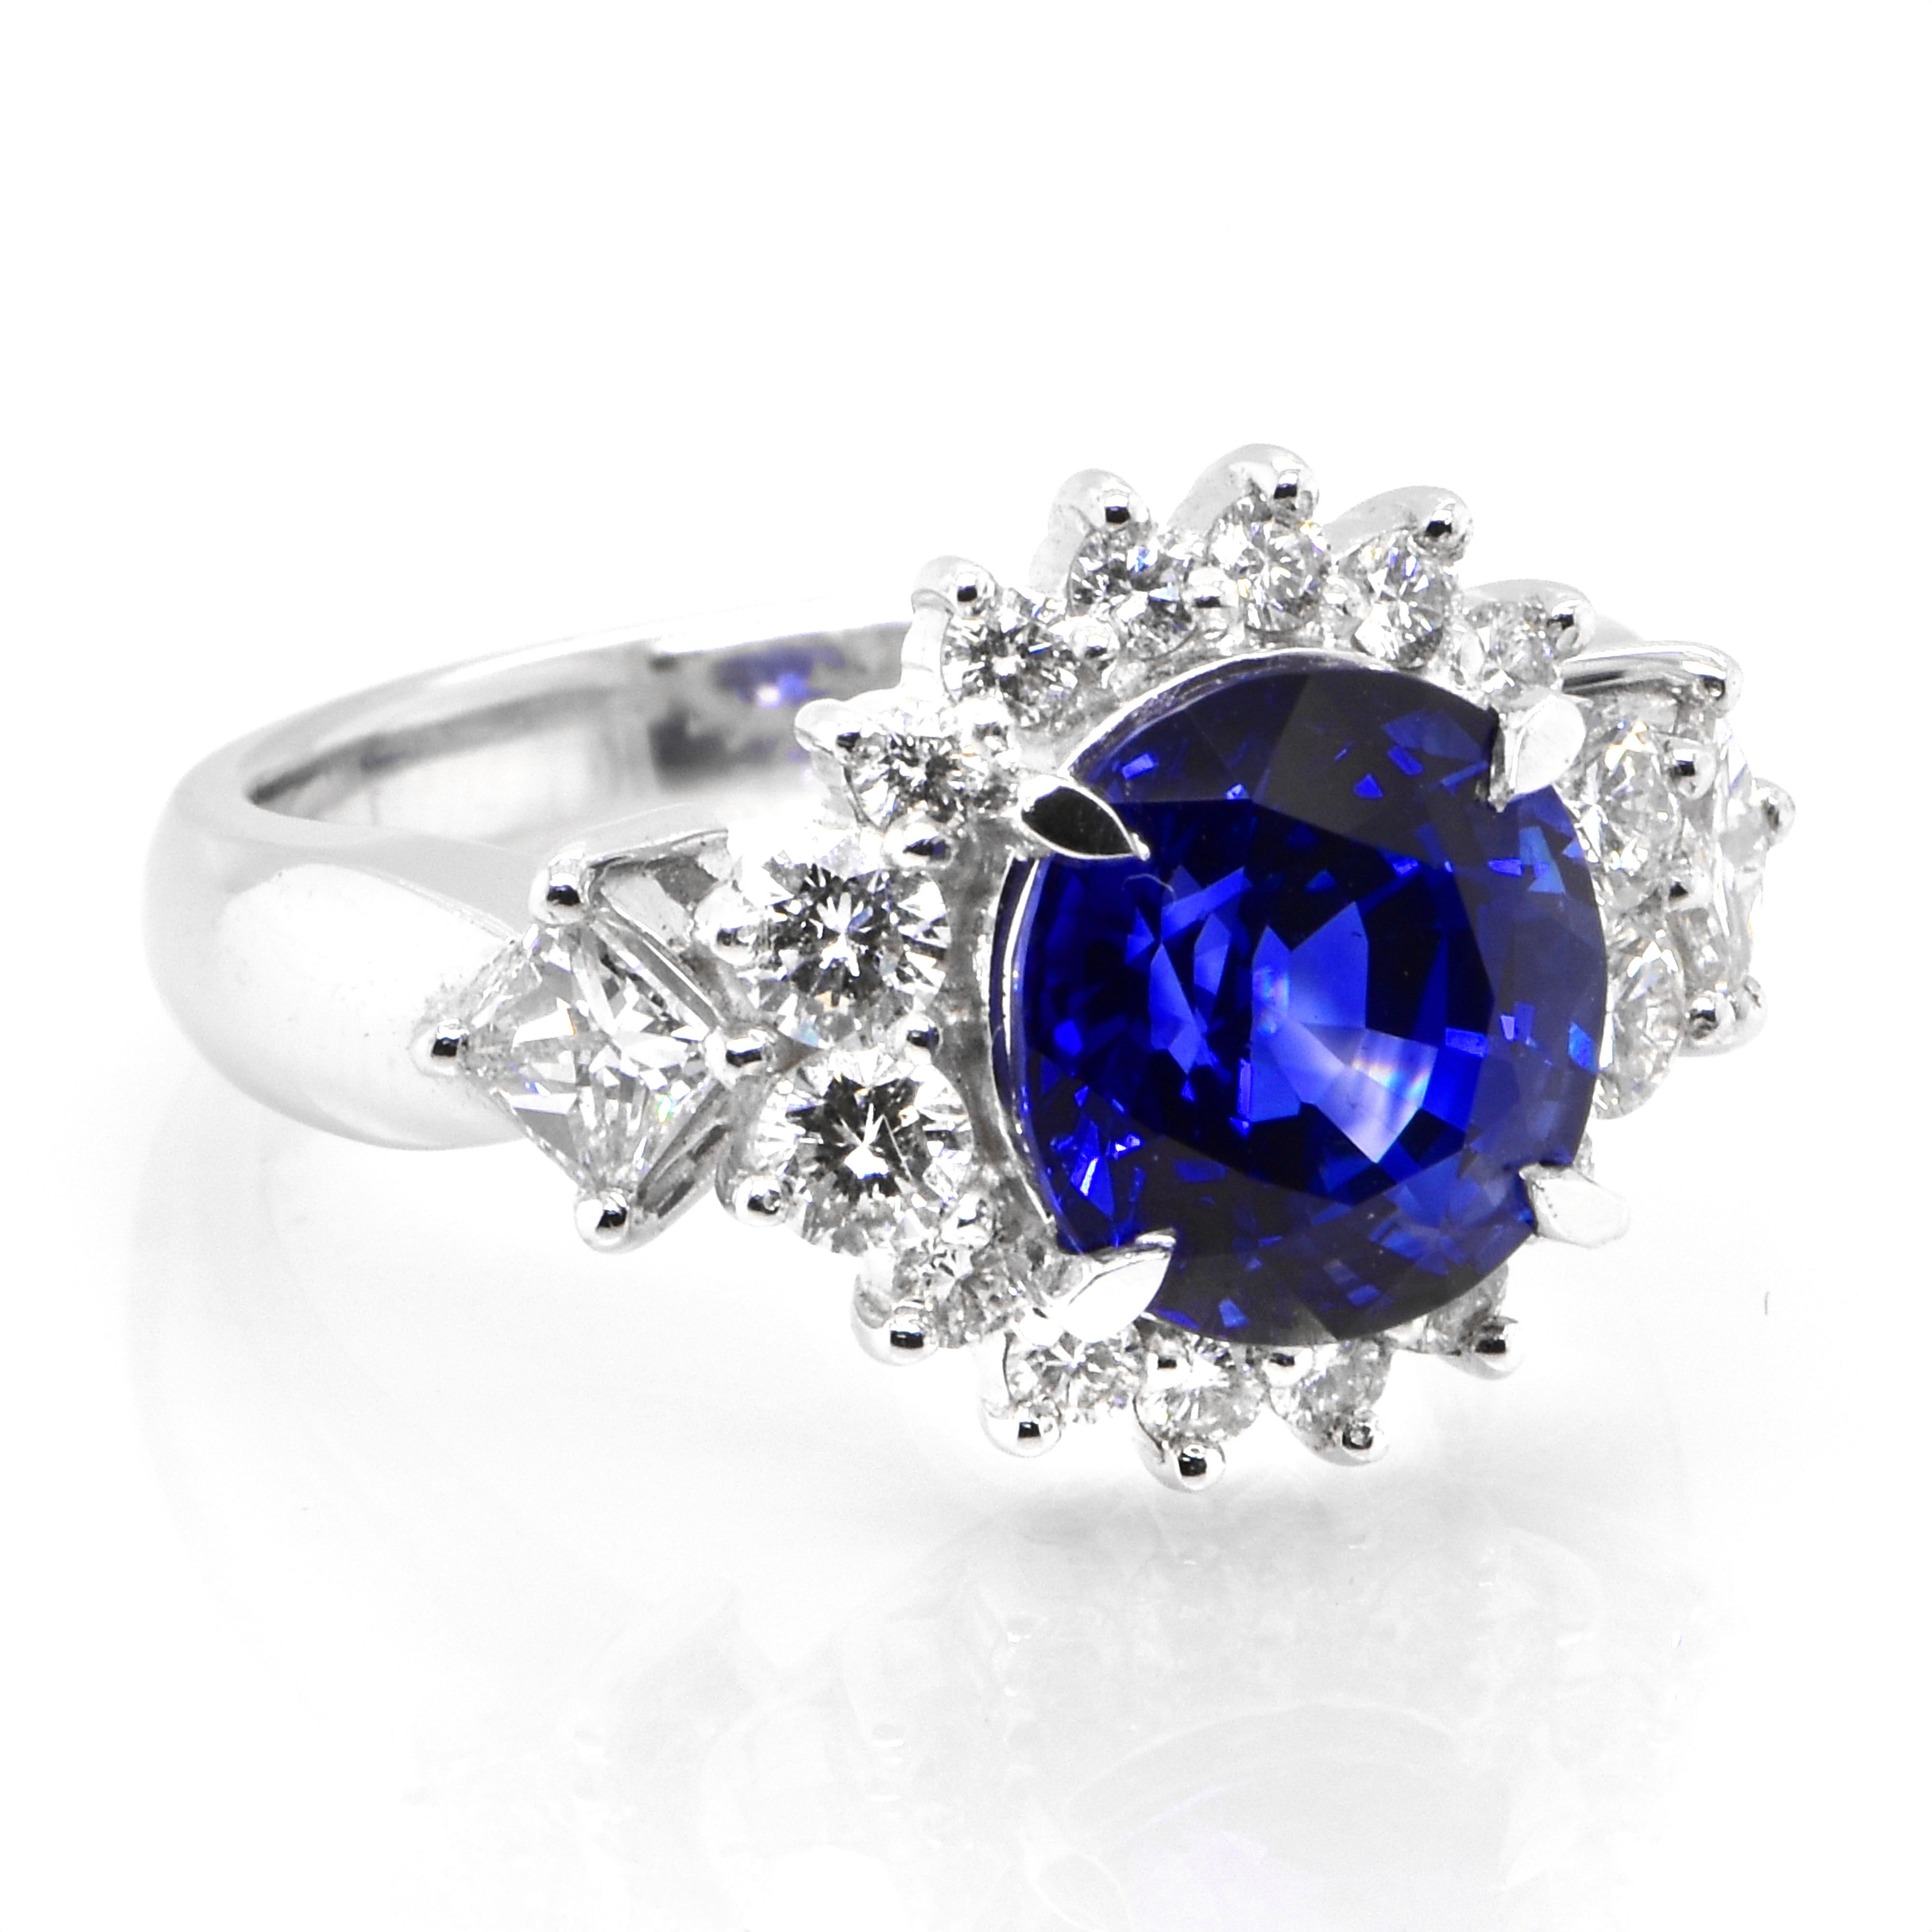 Modern 3.21 Carat Natural Royal Blue Color Sapphire and Diamond Ring Made in Platinum For Sale